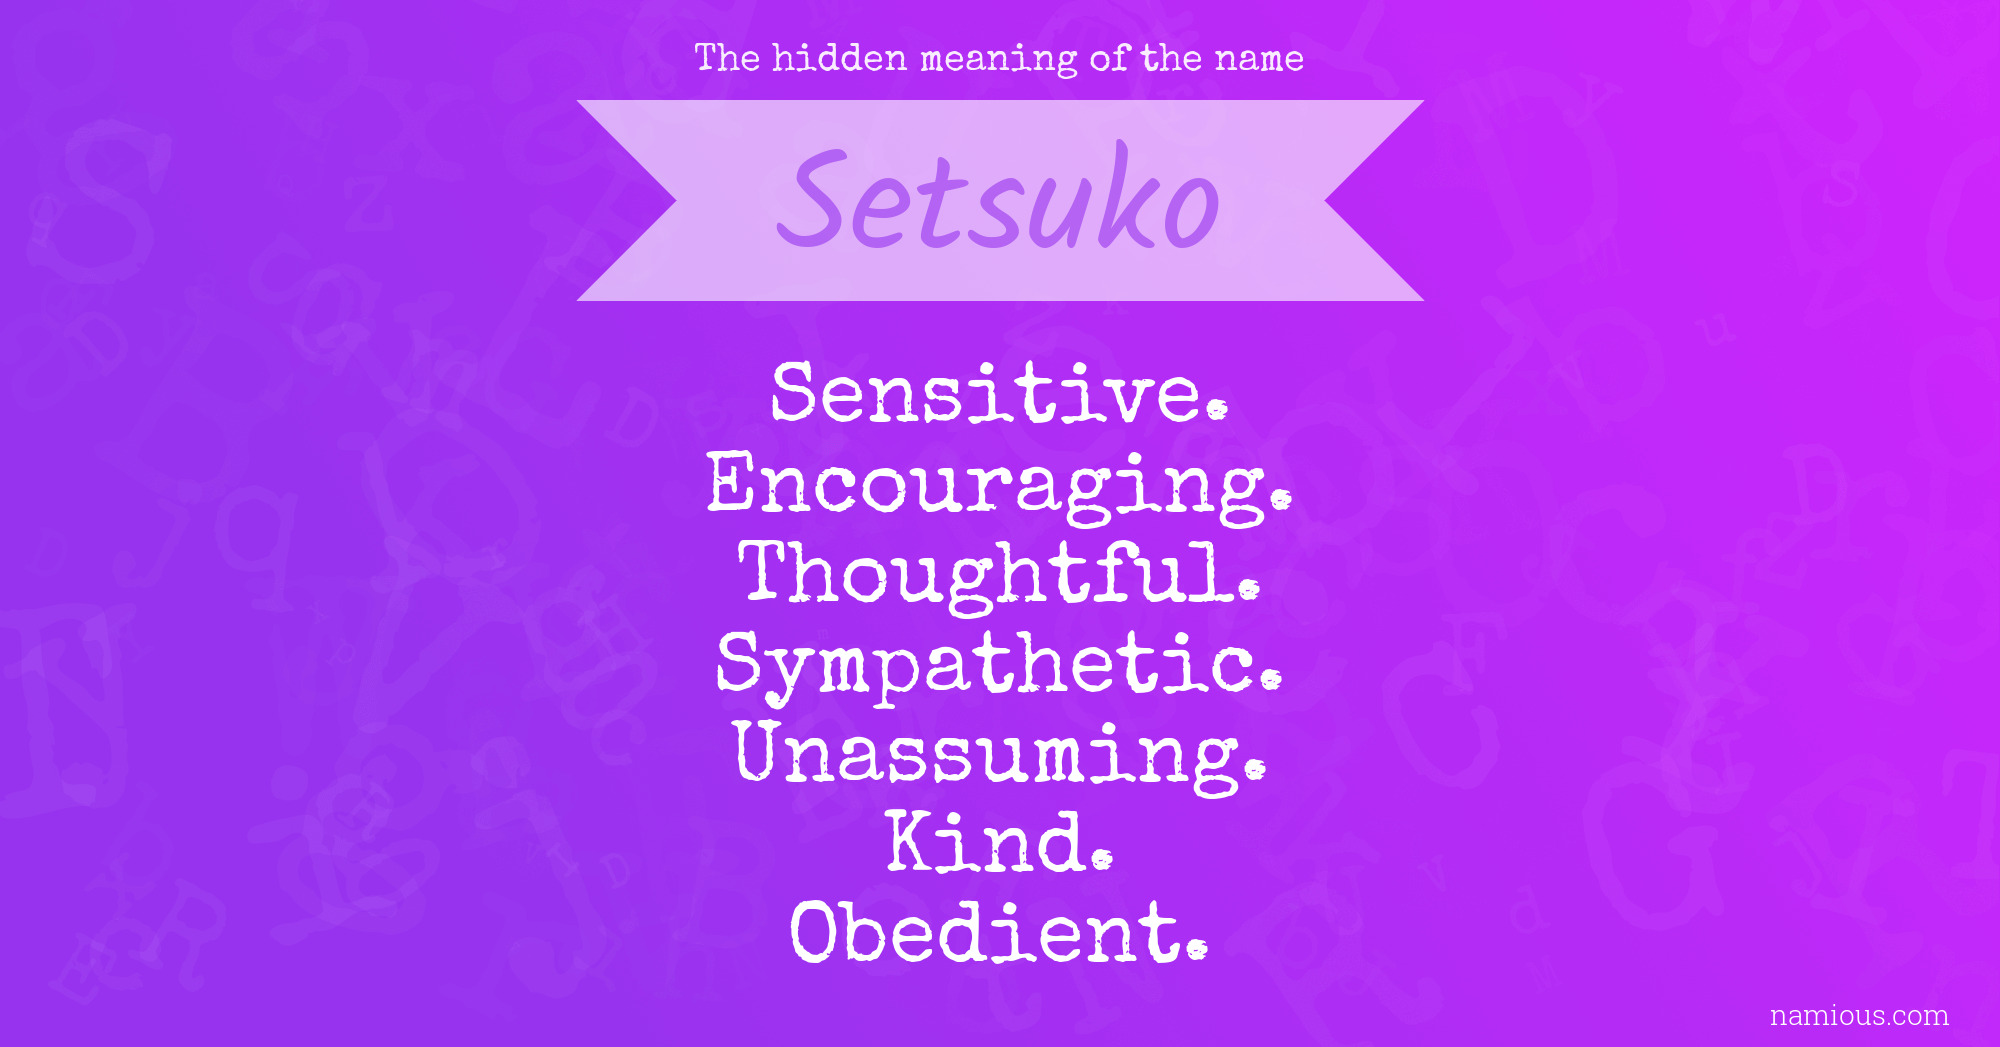 The hidden meaning of the name Setsuko